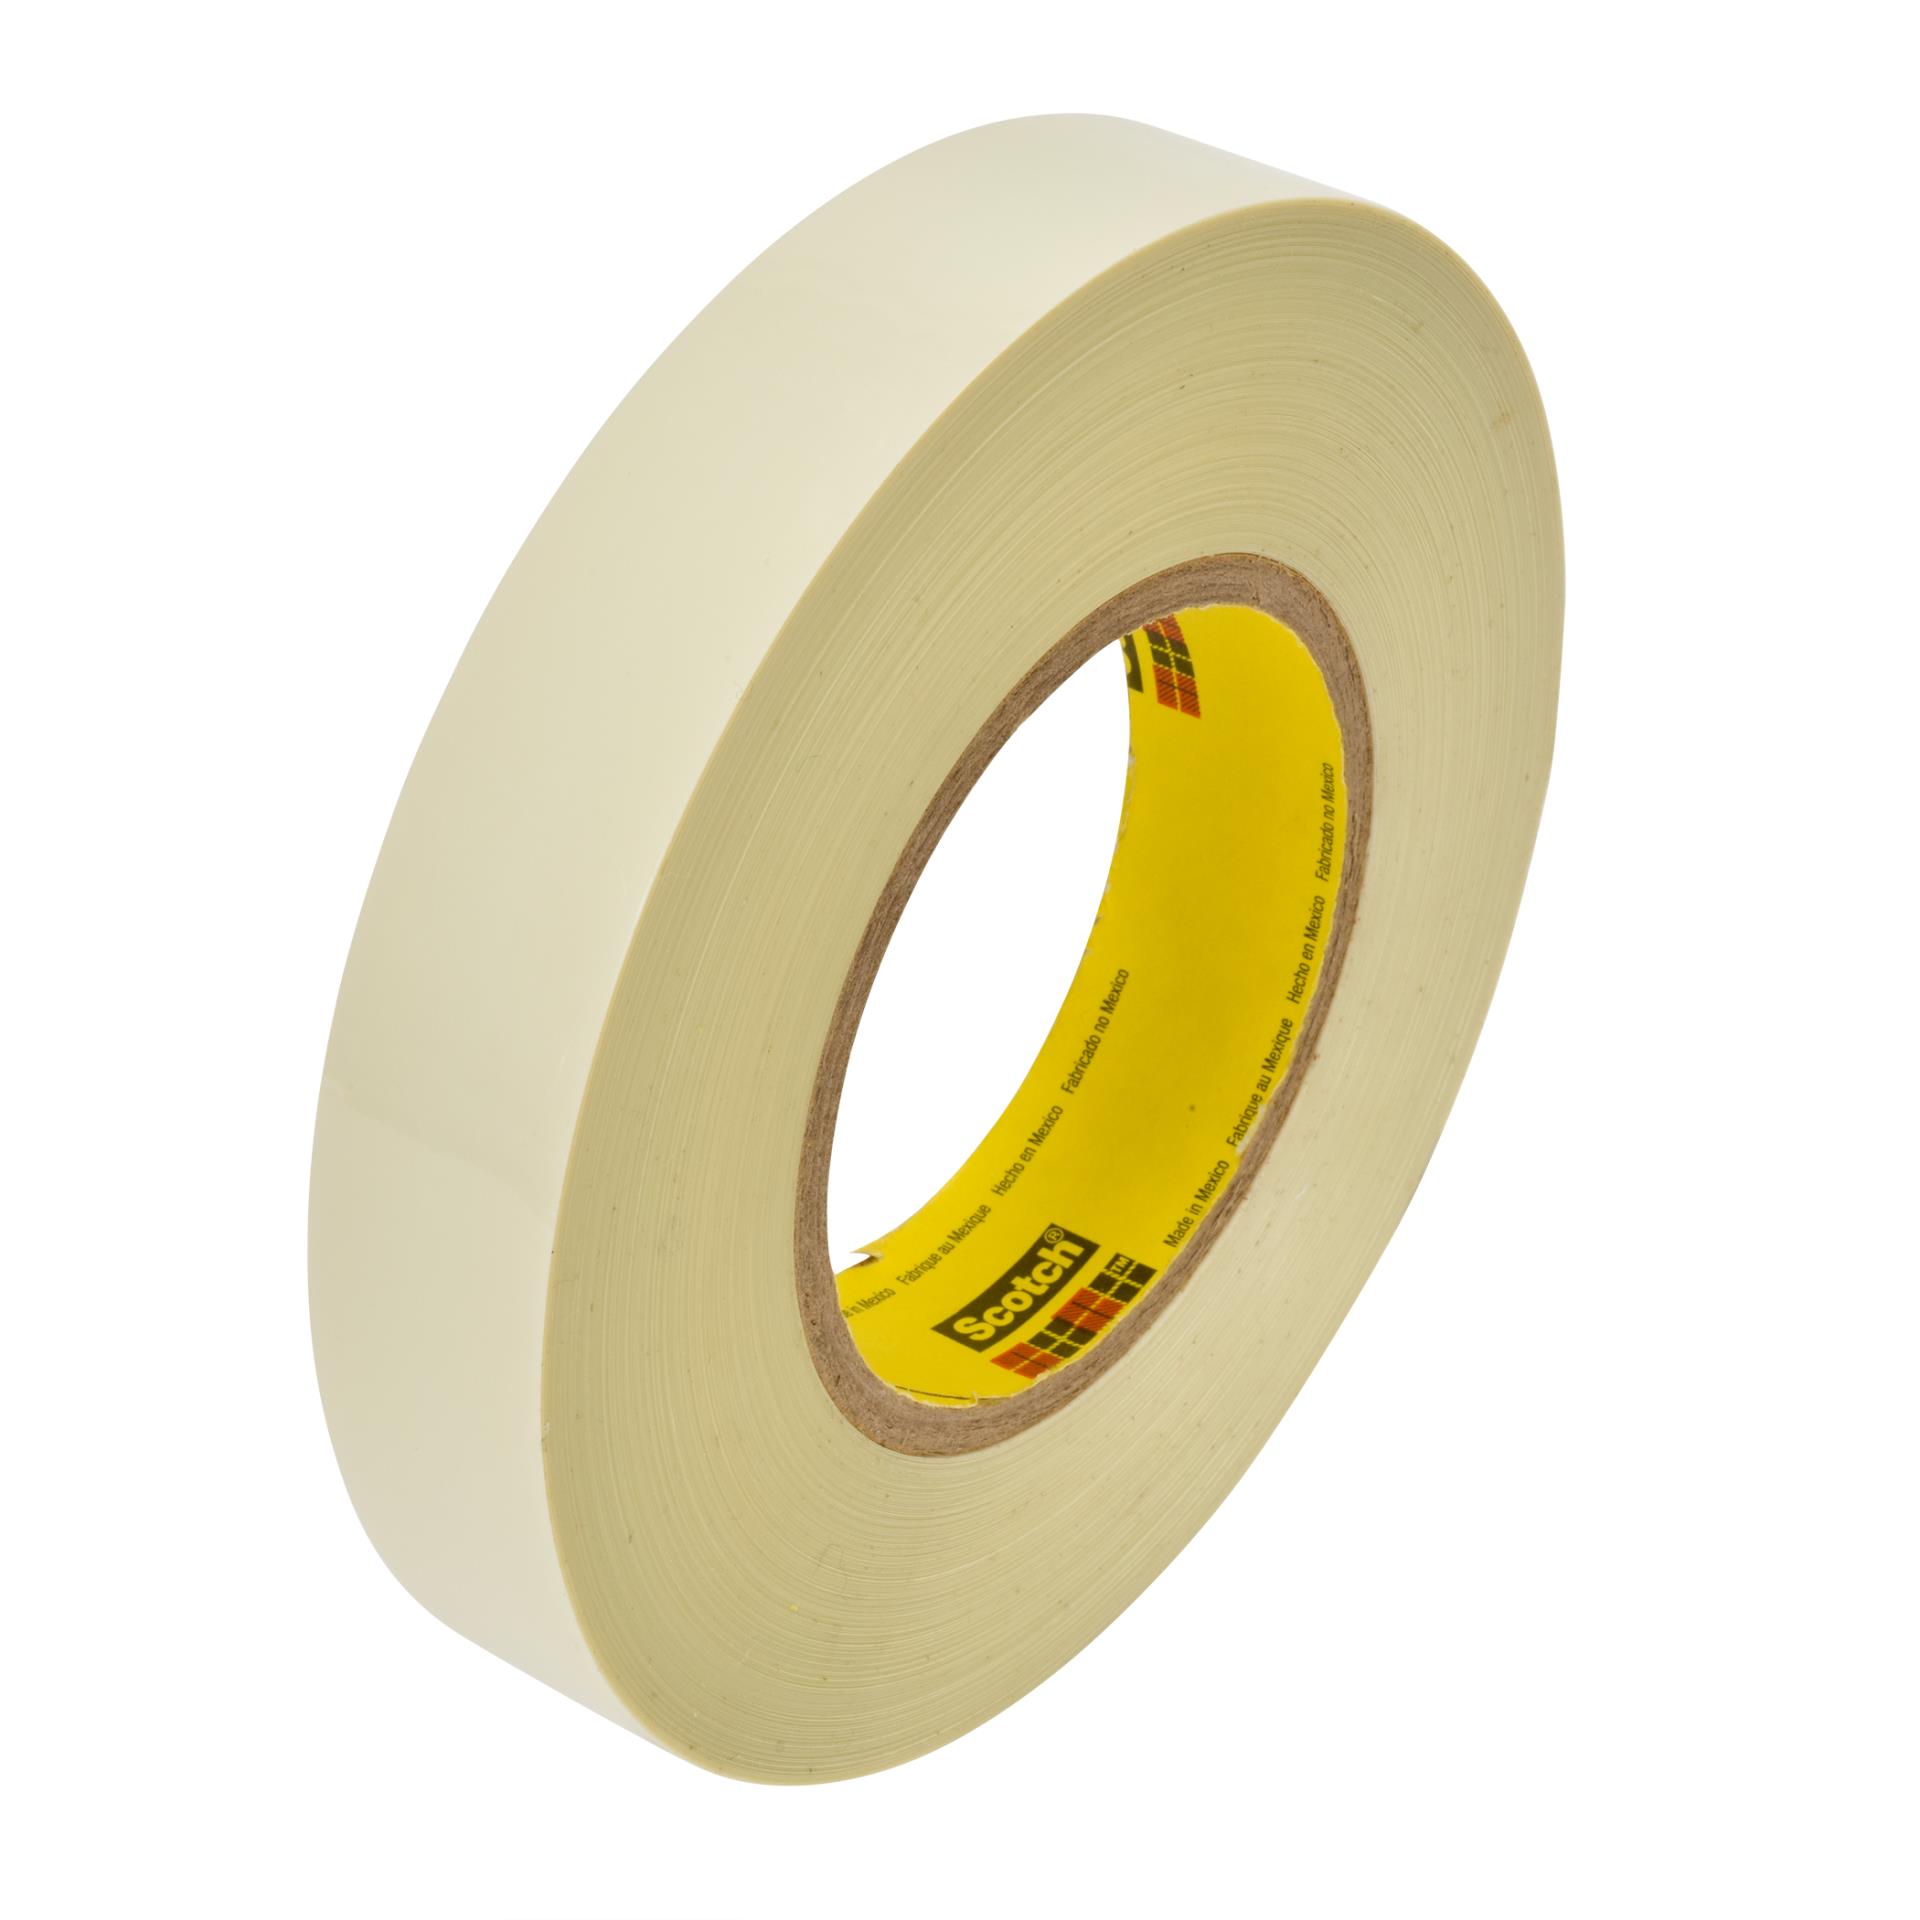 3M Scotch Code Wire Marker Tape 96"Refill Roll SDR-L1 Printed w/ "L1" 10 Pack 